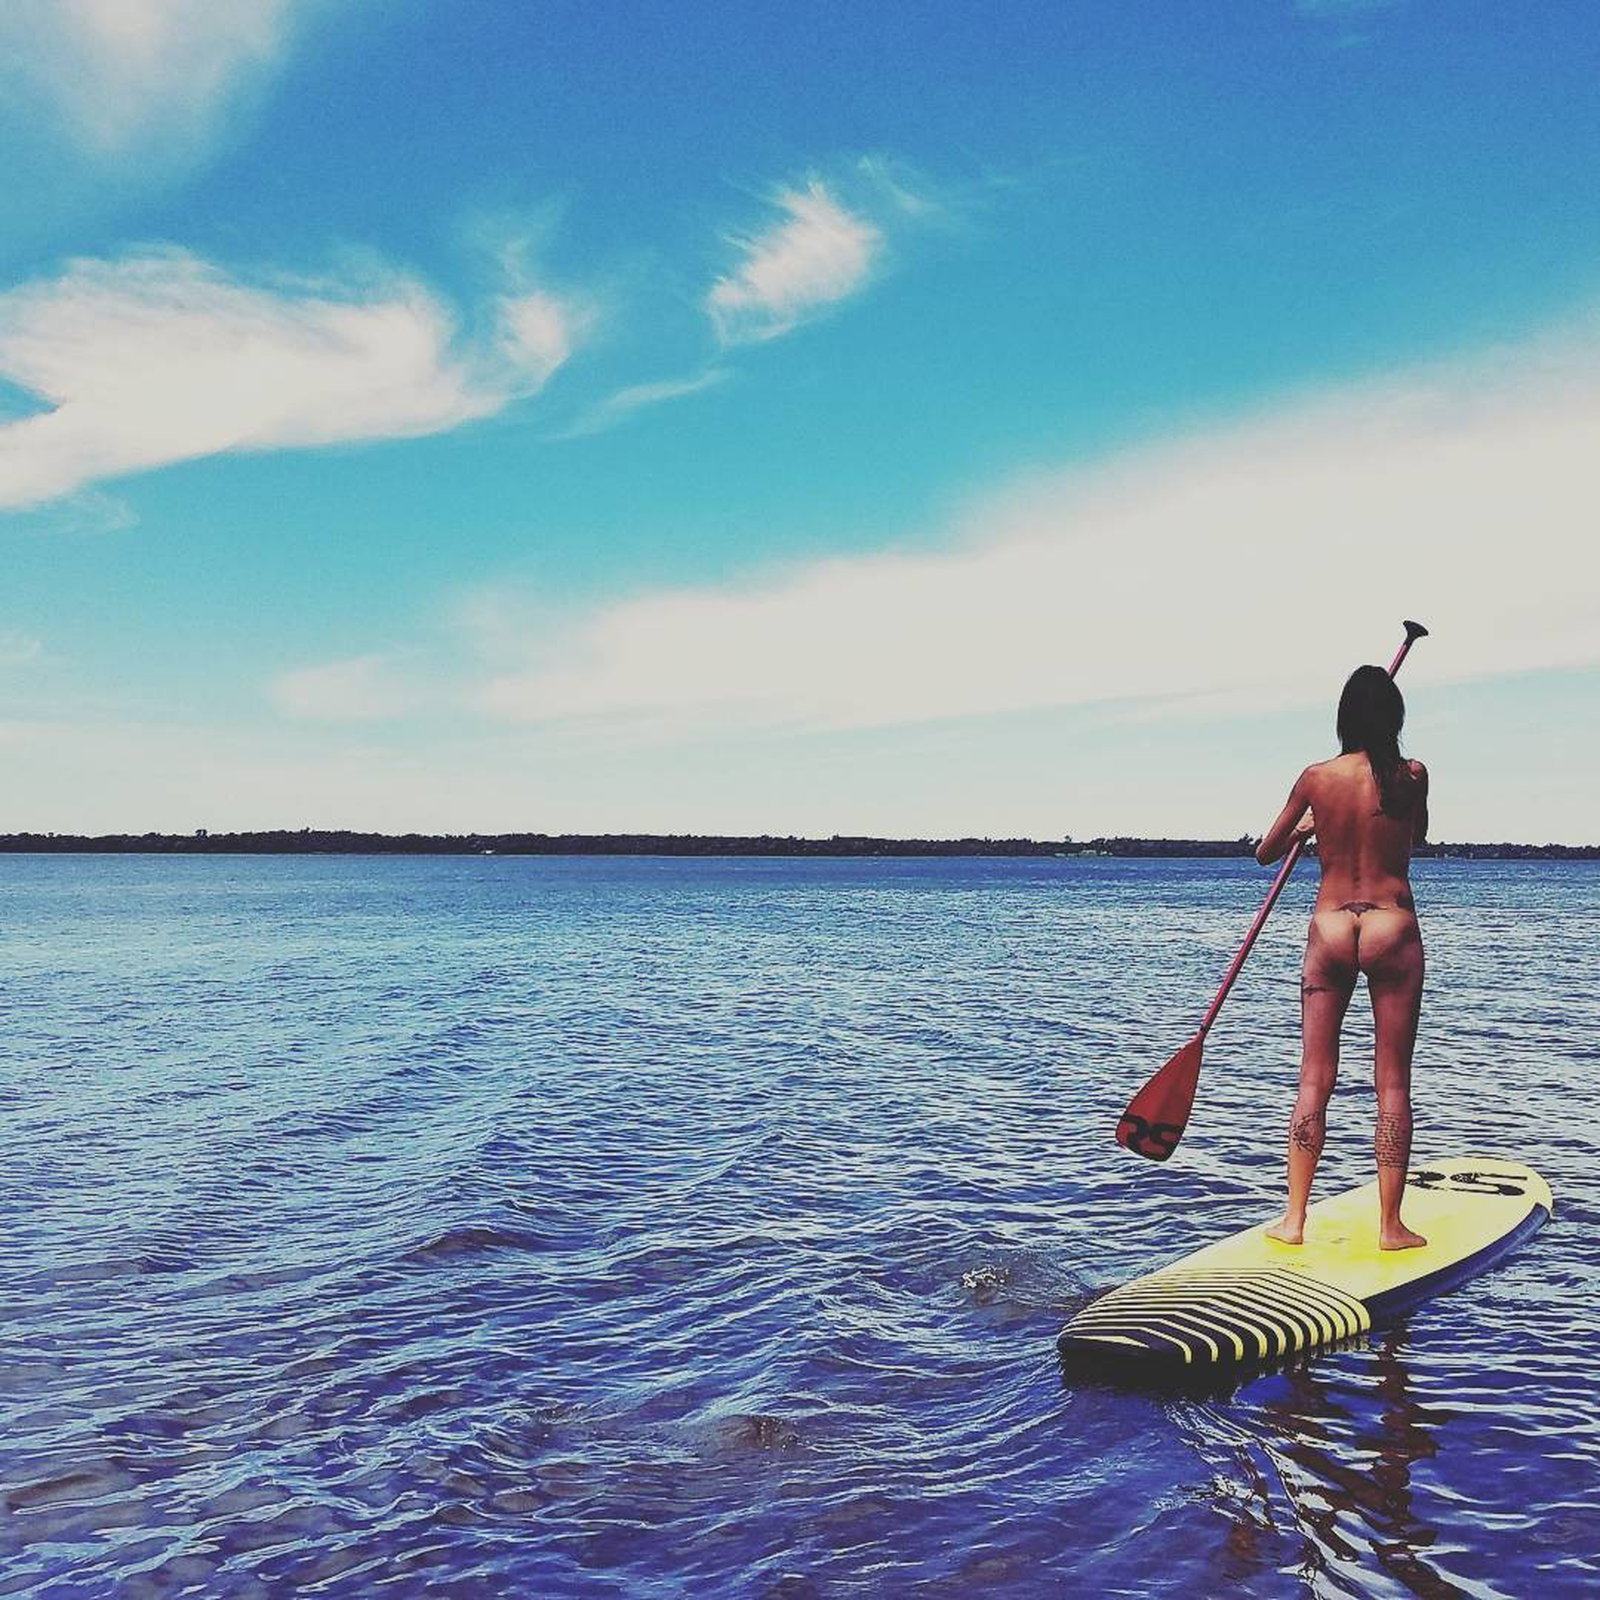 Photo by Captain-LeChene with the username @Captain-LeChene,  October 10, 2017 at 10:22 PM and the text says 'thenaturalsurf:
cheekyventures
Relaxing! #paddleboarding #nüdes #cheekyventures #summer #nakedsport #nudeback #getyournudeon #nudism #outdoornude #outdoornude #getyourassintonature #getyournudeon #sup #tan'